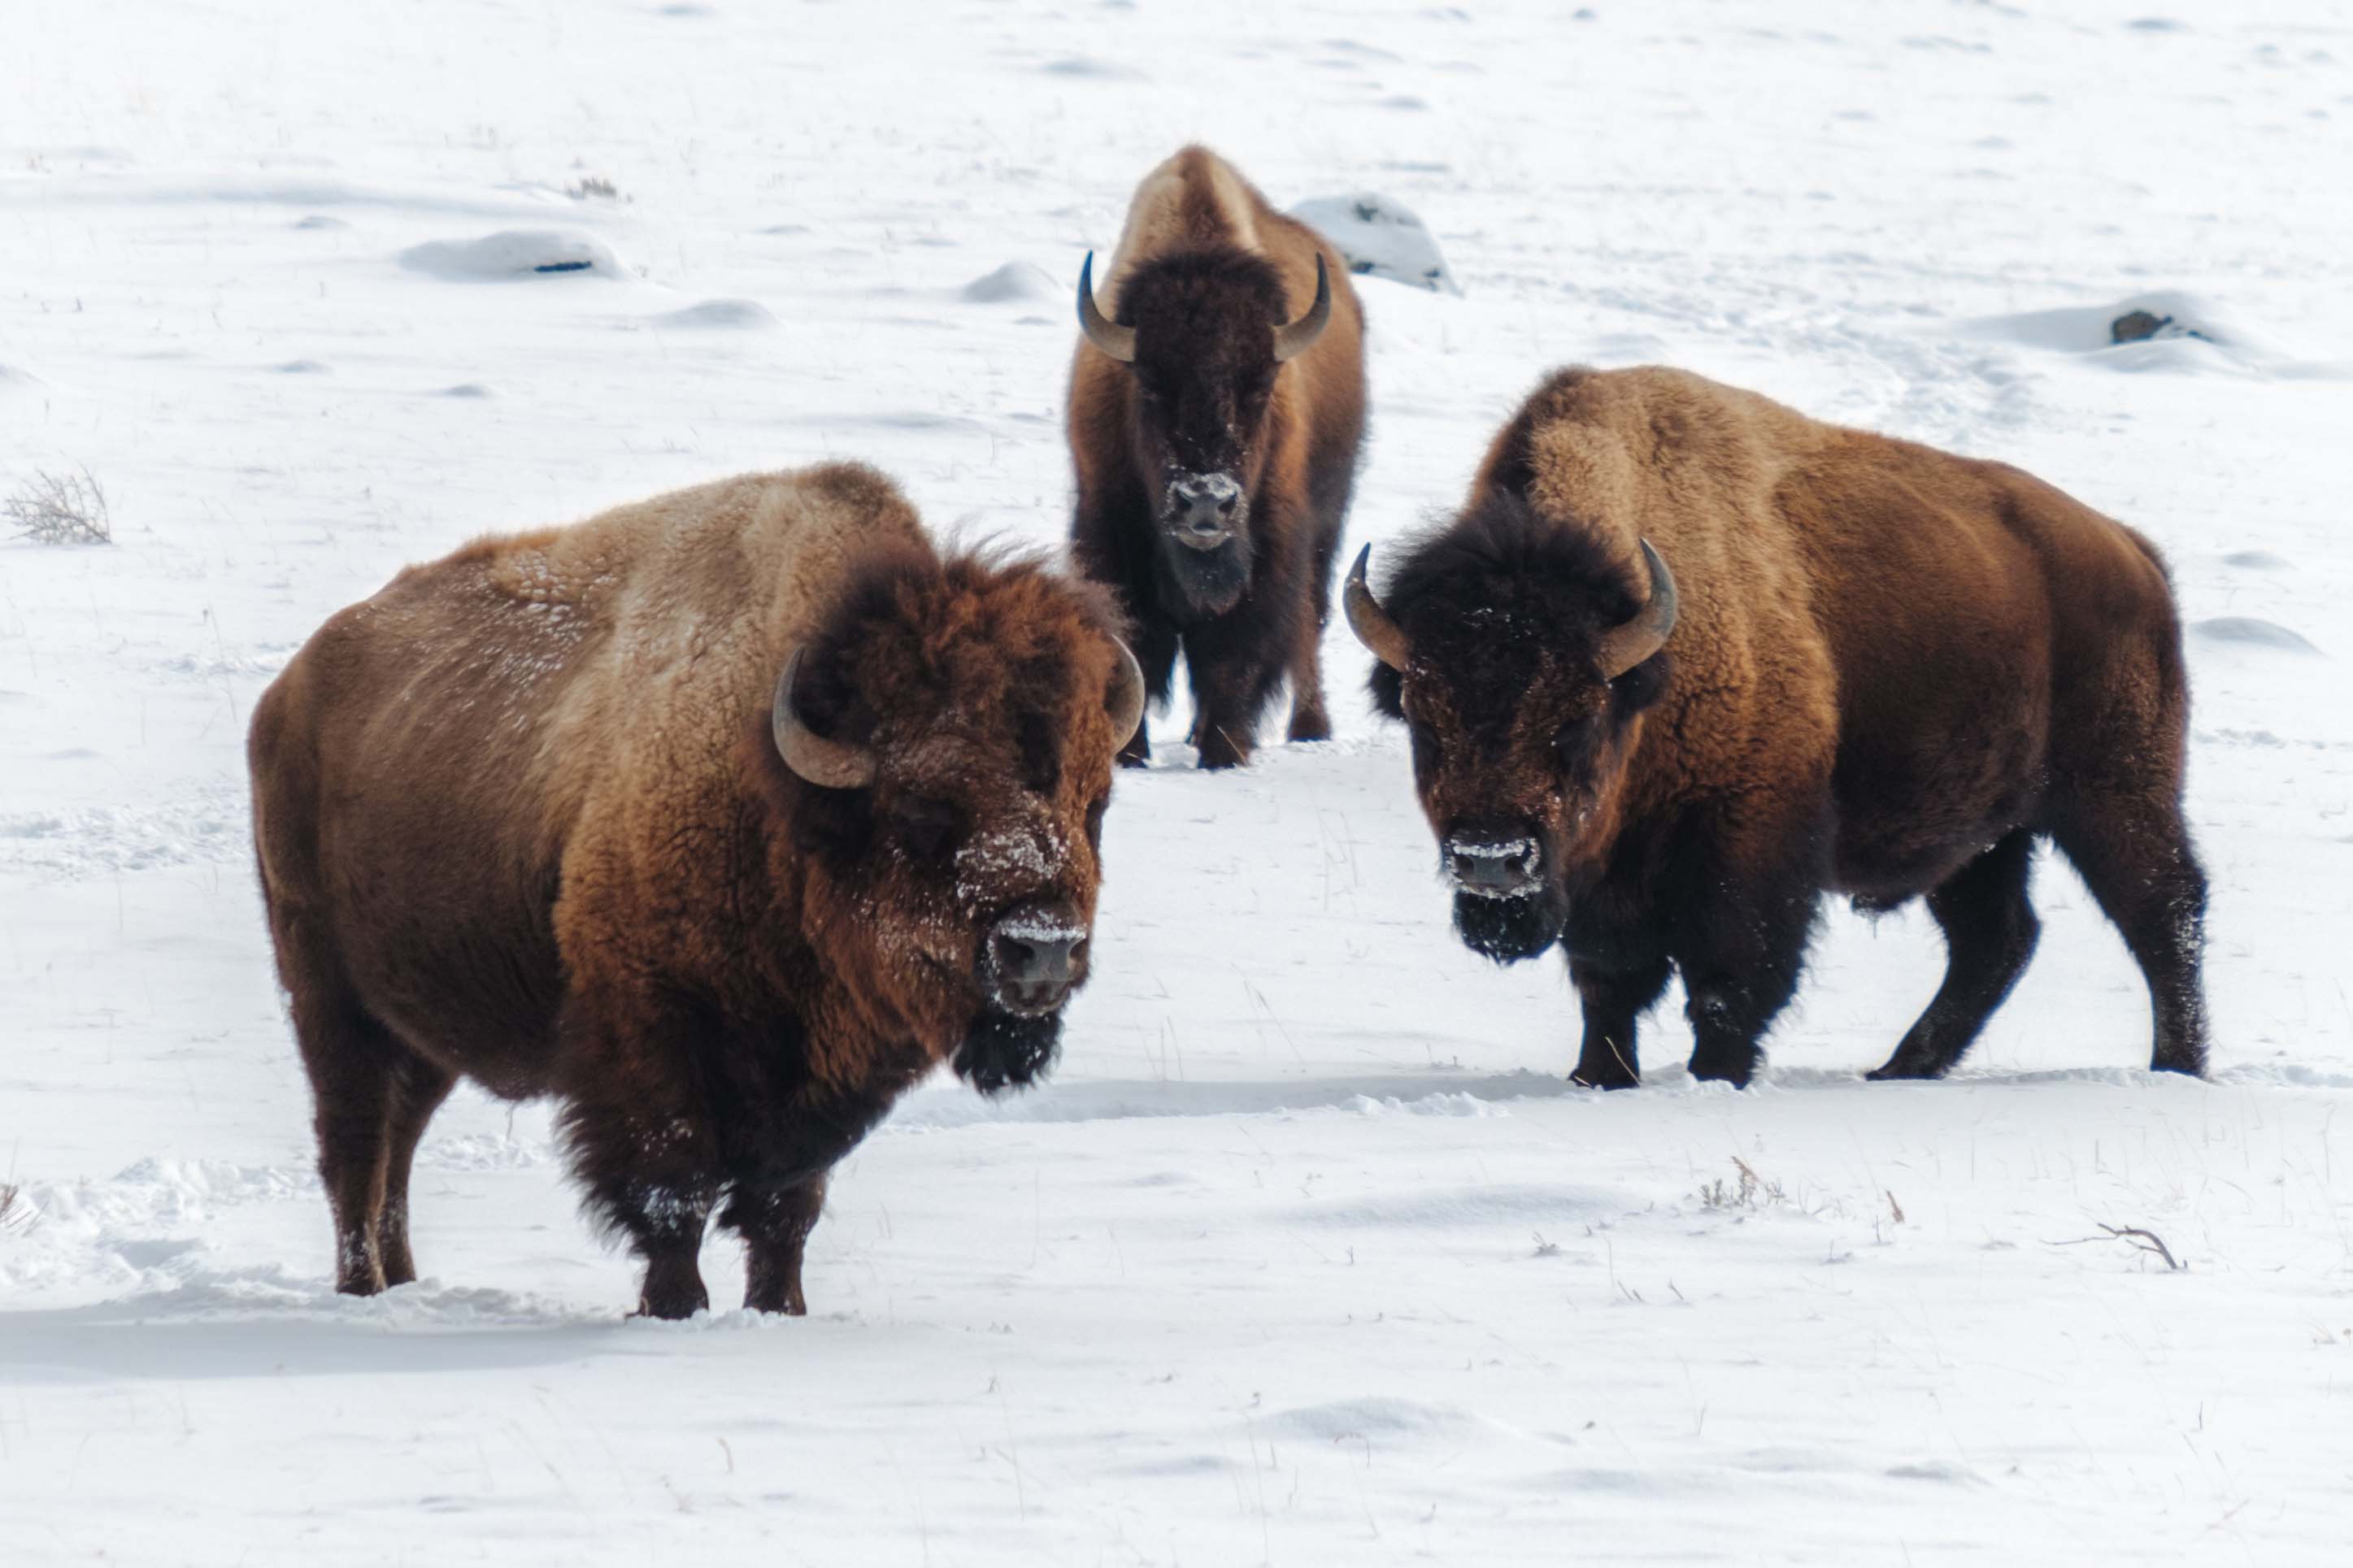 Tips For Enjoying Yellowstone National Park In The Winter